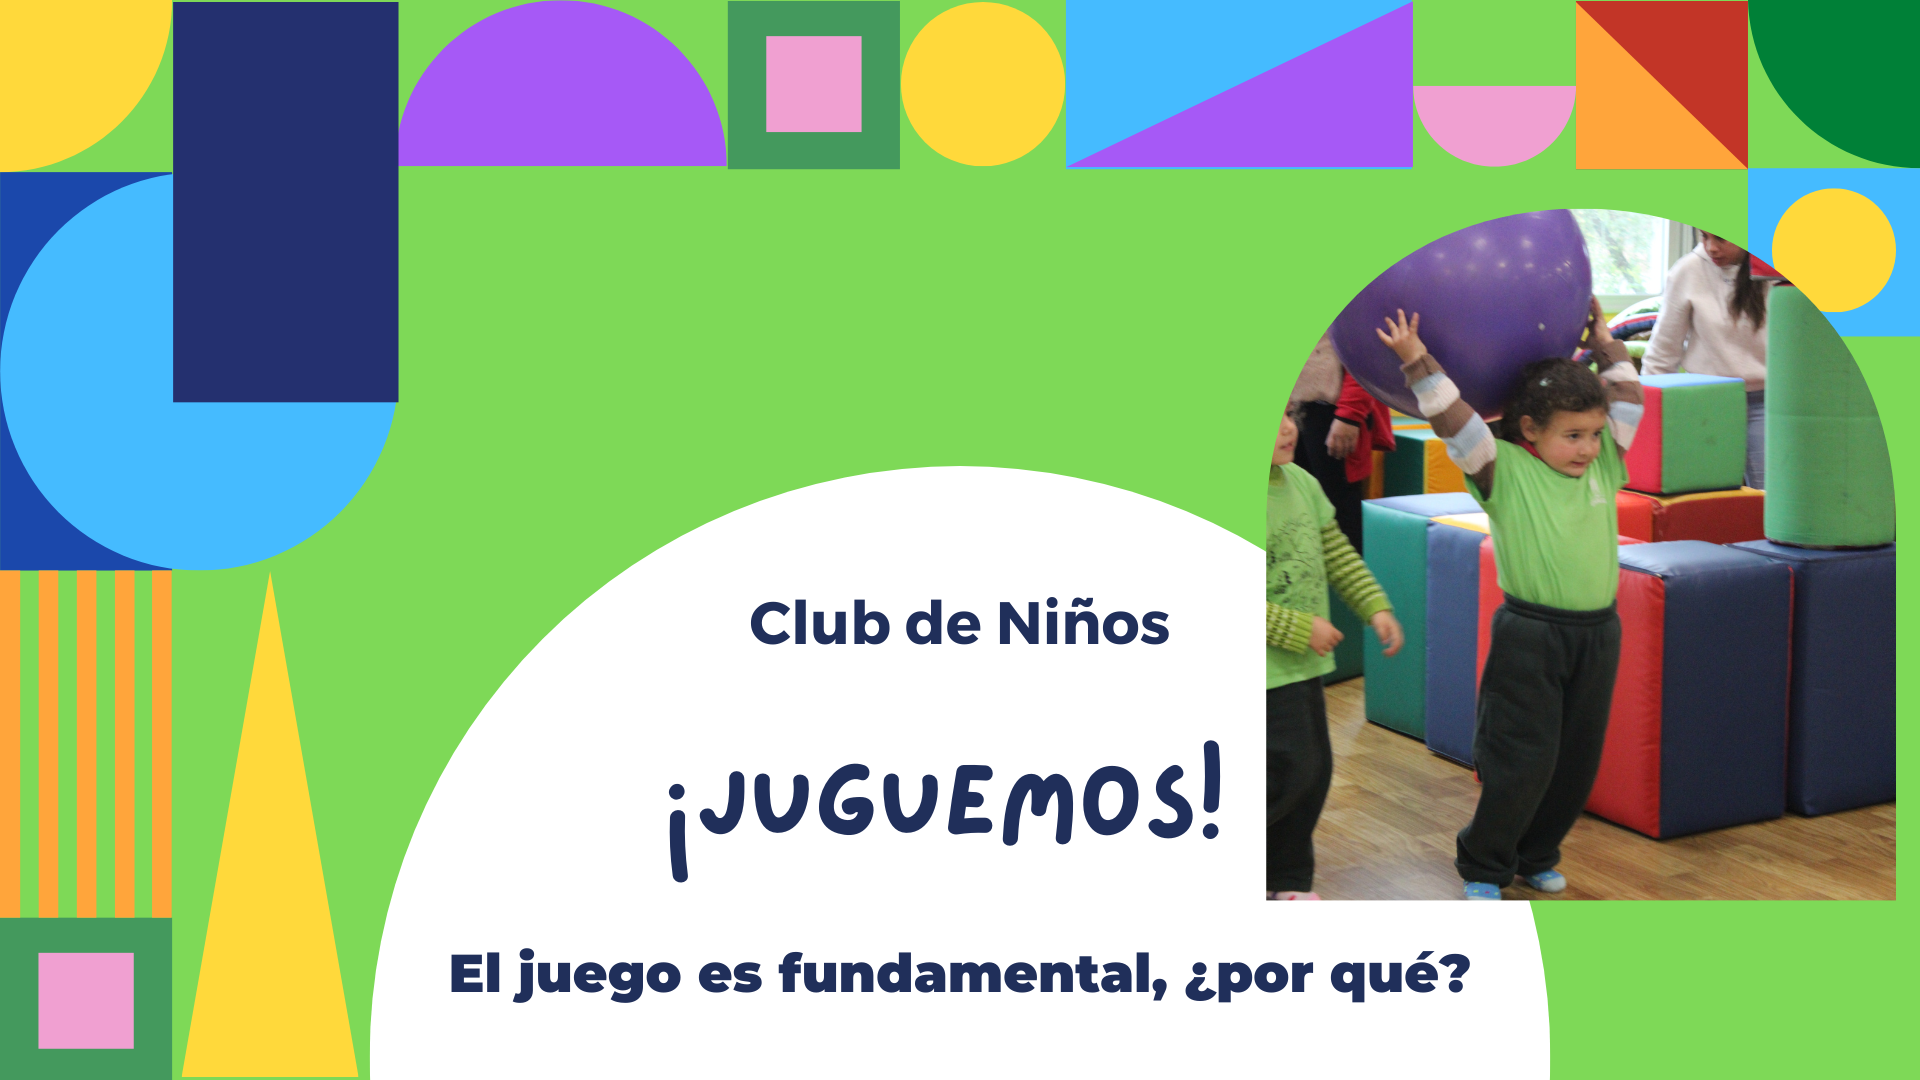 Let’s Play – Children’s Club